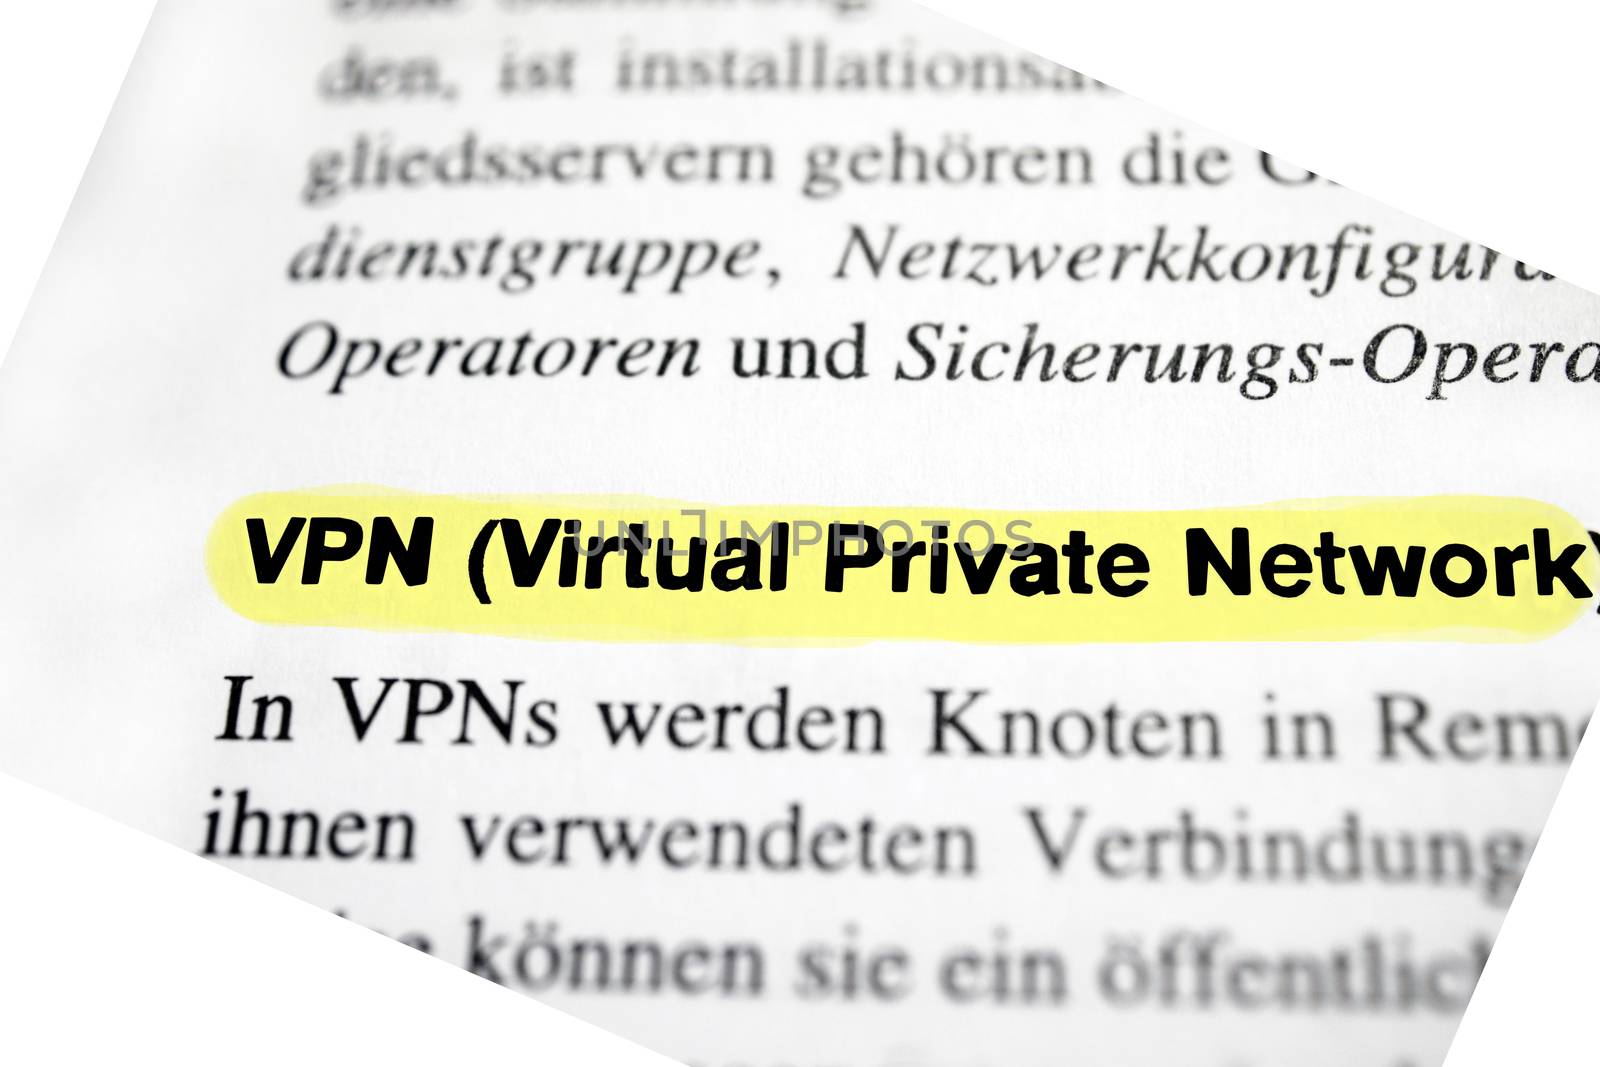 VPN (Virtual Private Network) is a technology that allows it to authorized computers from all over the Internet to access the private or local network of a company, institution, etc. and is used for the secure exchange of data.